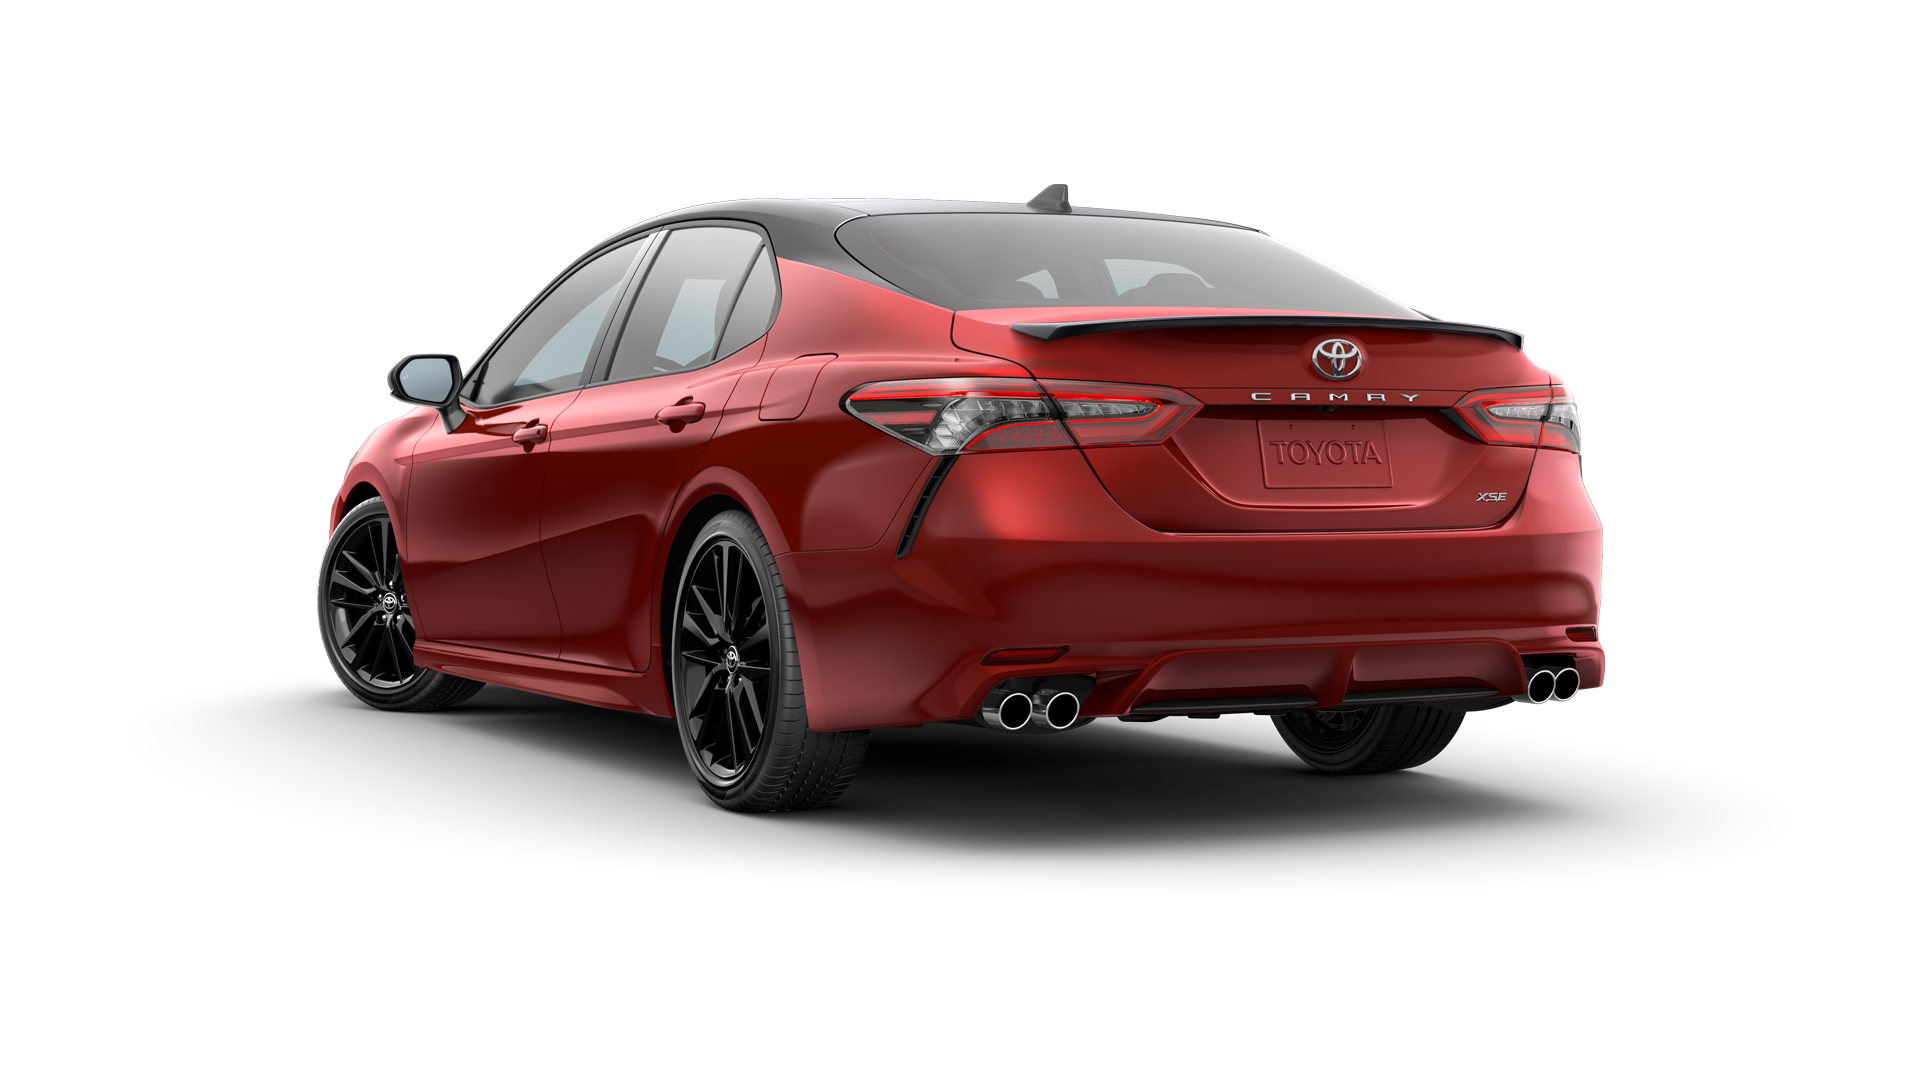 2023 Toyota Camry in Supersonic Red/Midnight Black Metallic Roof*.